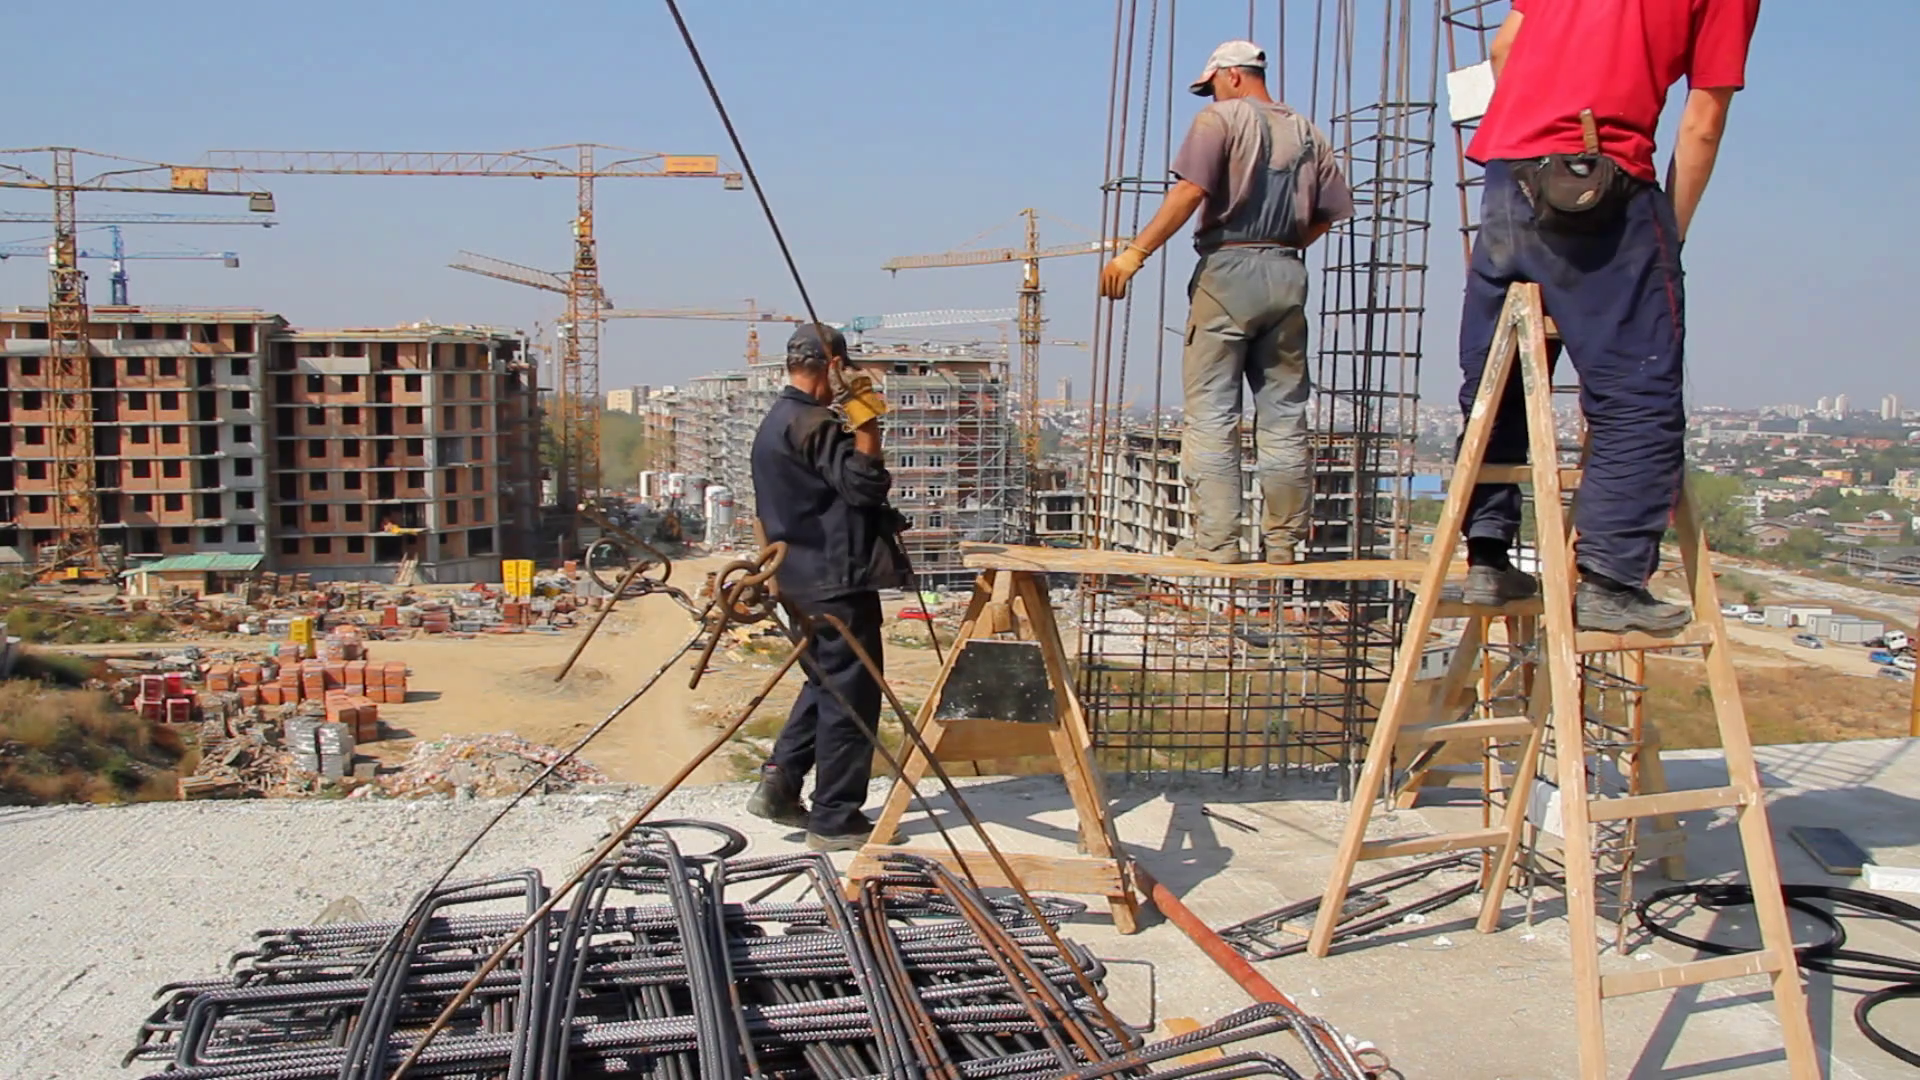 Construction site, men working on a building. Construction engineer ...